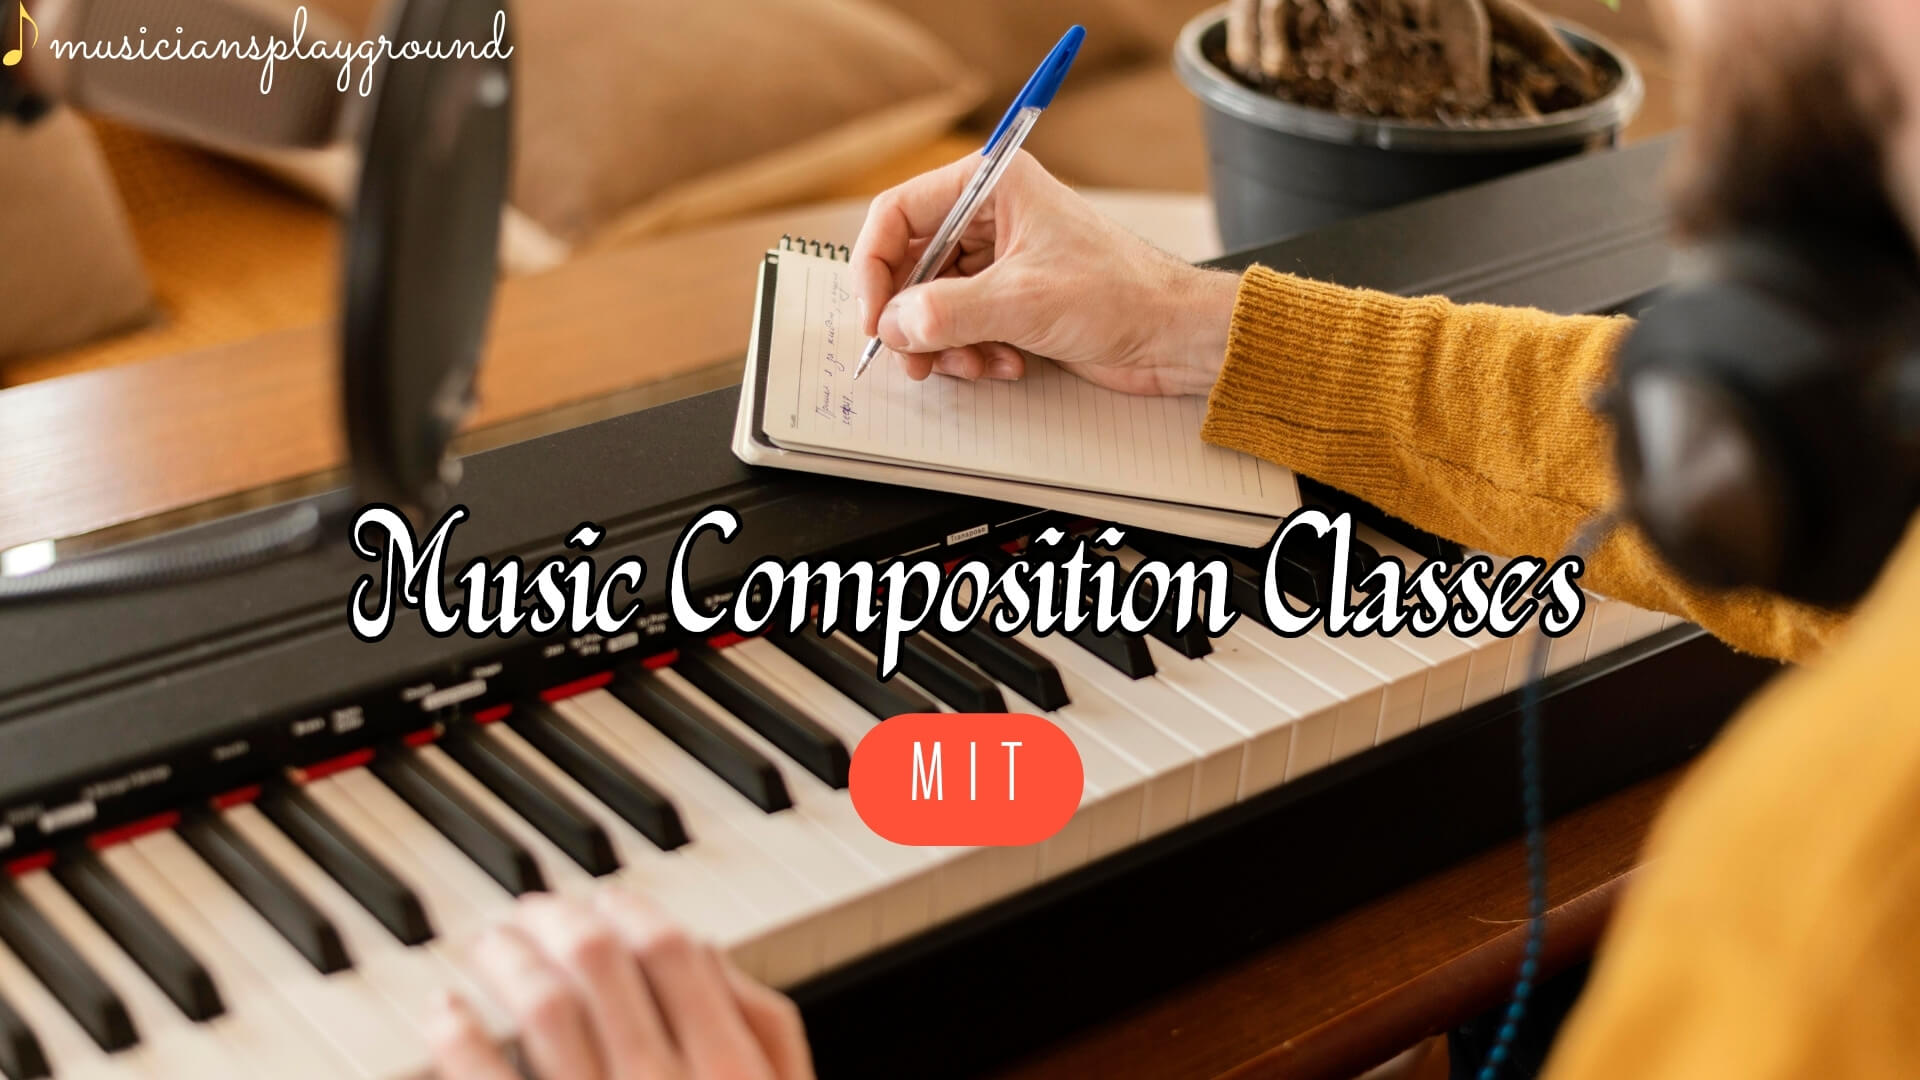 MIT Music Composition Classes: Unlock Your Musical Potential at Musicians Playground